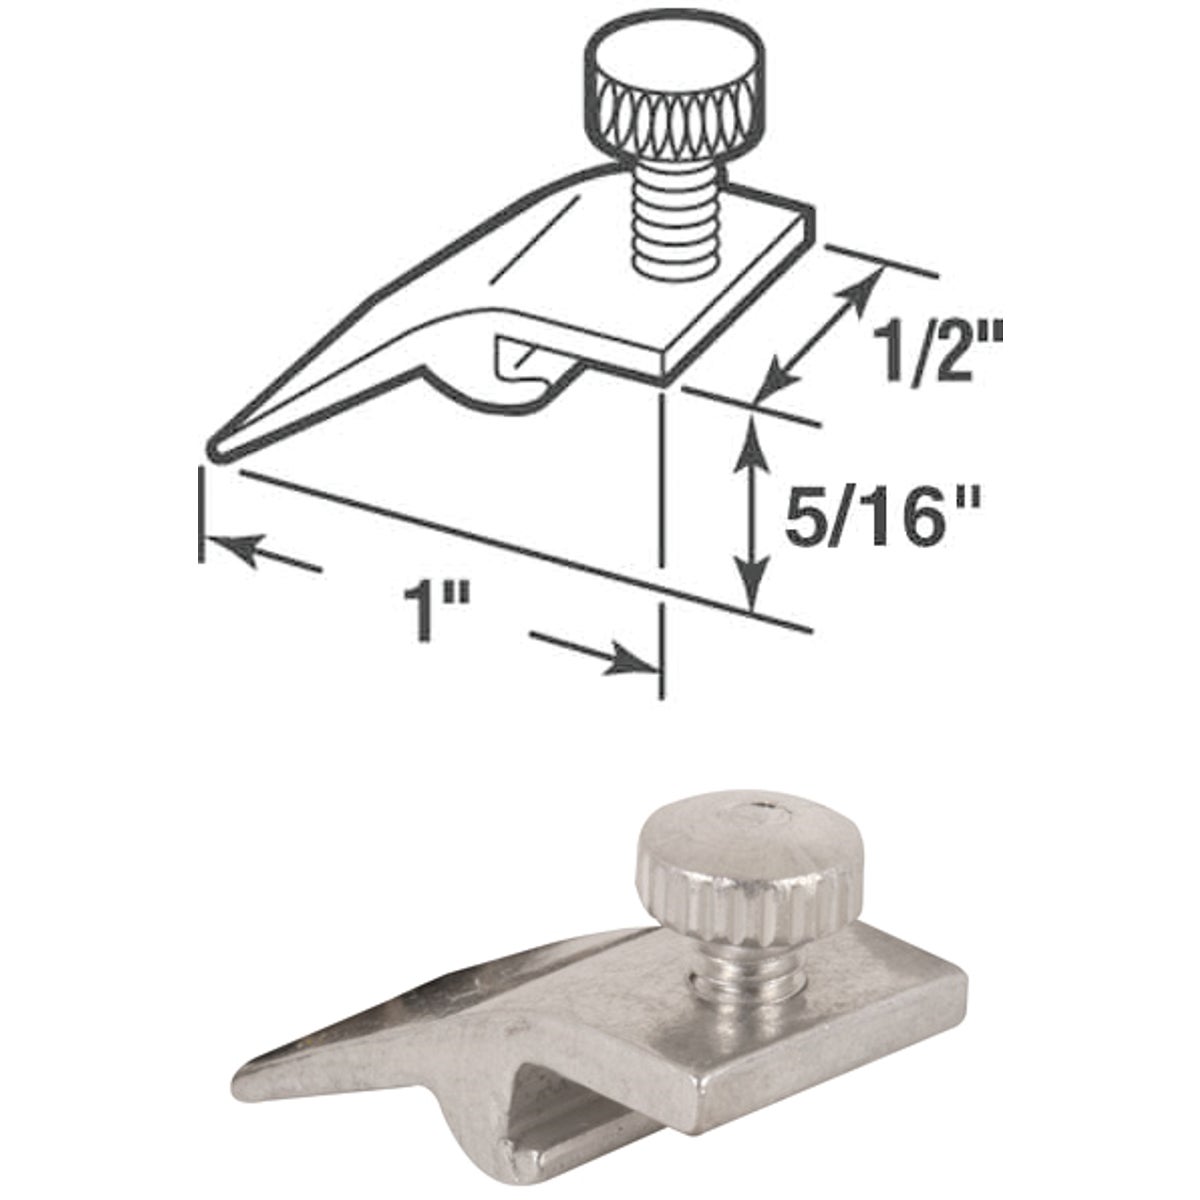 Item 267376, These are extruded aluminum clips used to attach storm windows or screen 